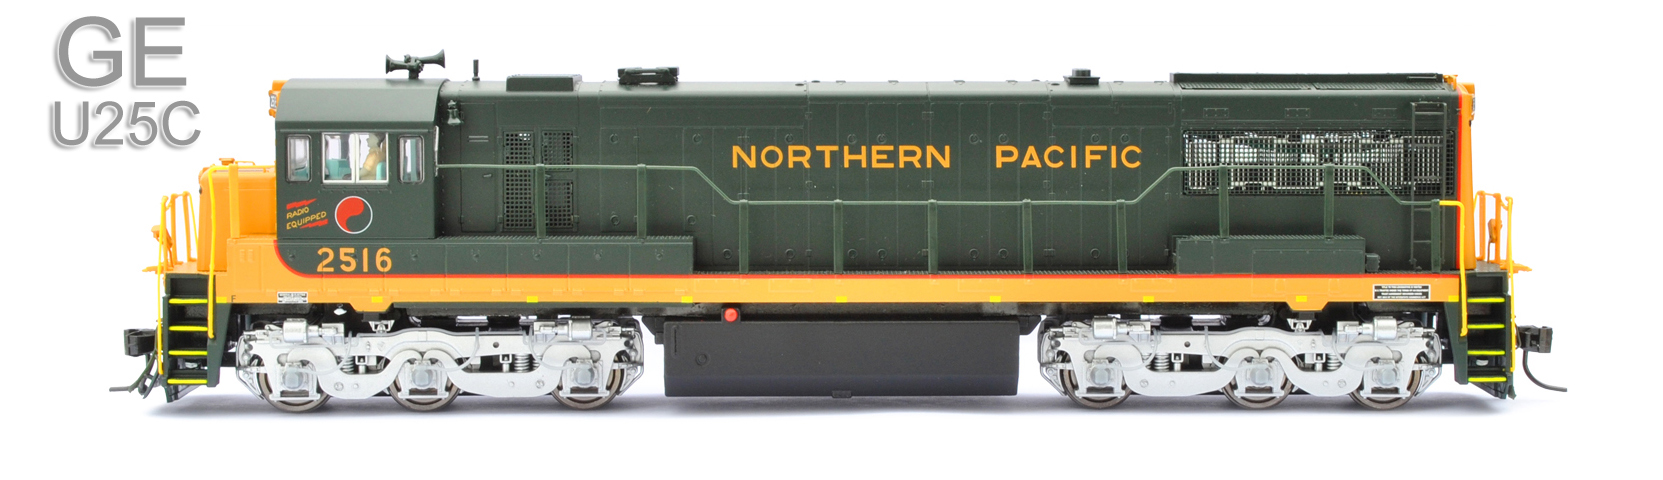 Northern Pacific - Road Numbers: 2516, 2517, 2518